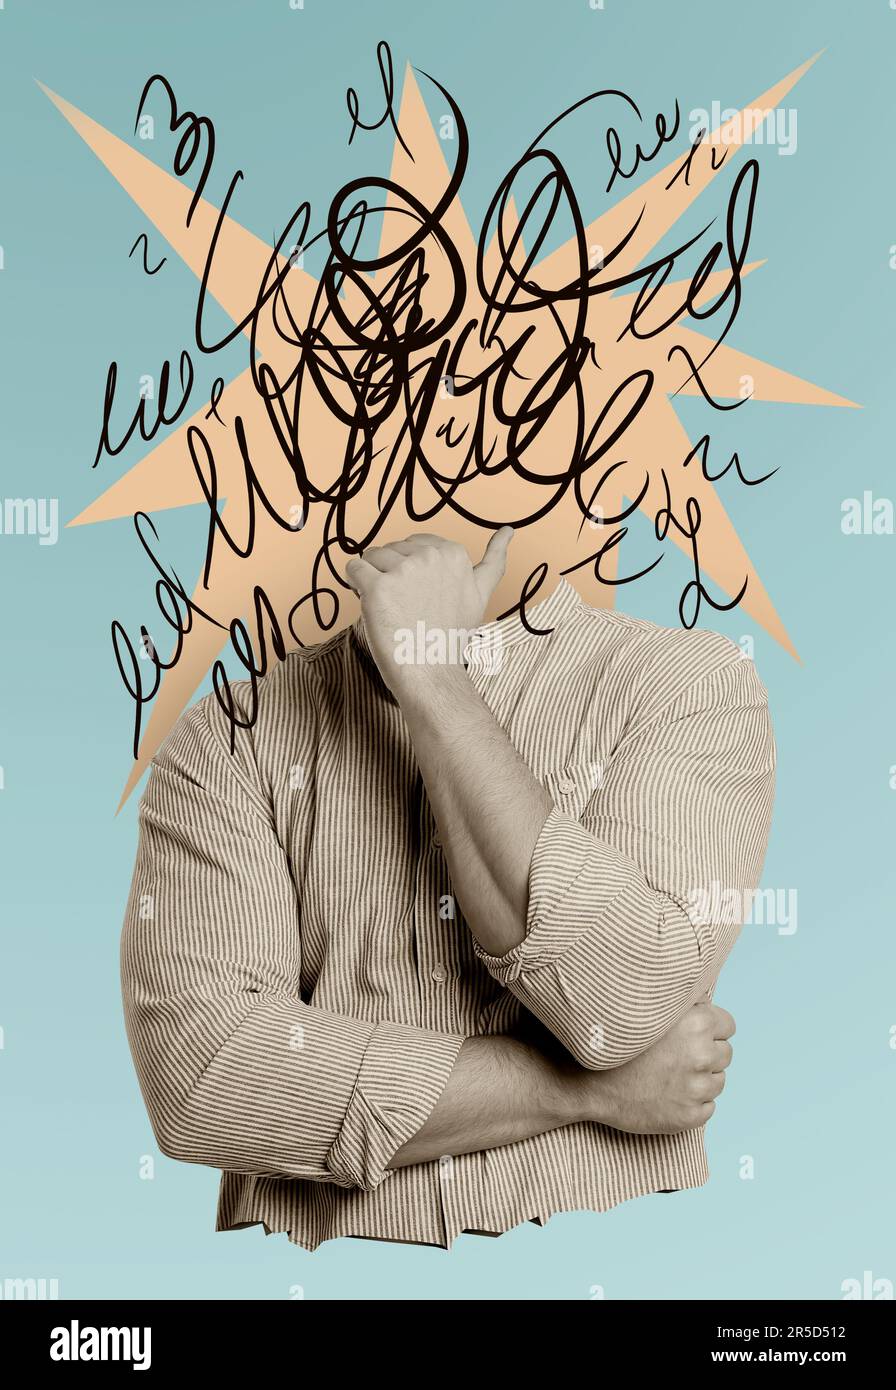 Creative artwork. Overflowing with ideas and thoughts. Man with explosion and doodles instead of head on light blue background Stock Photo